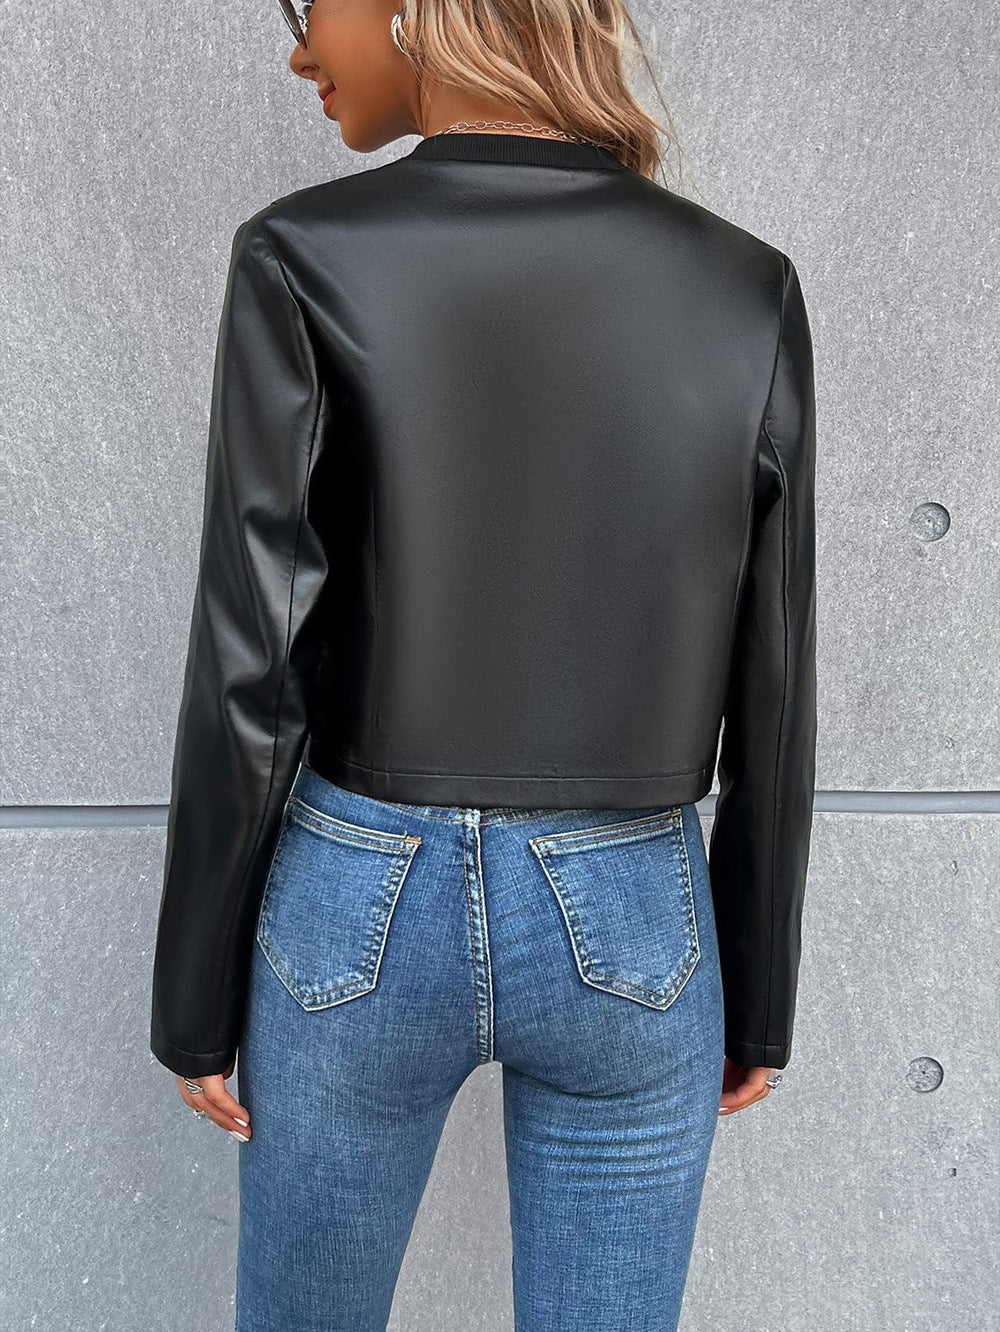 Casual Long Sleeve Zip Cardigan Tops Faux Leather Motorcycle Leather Jacket Coat for Women